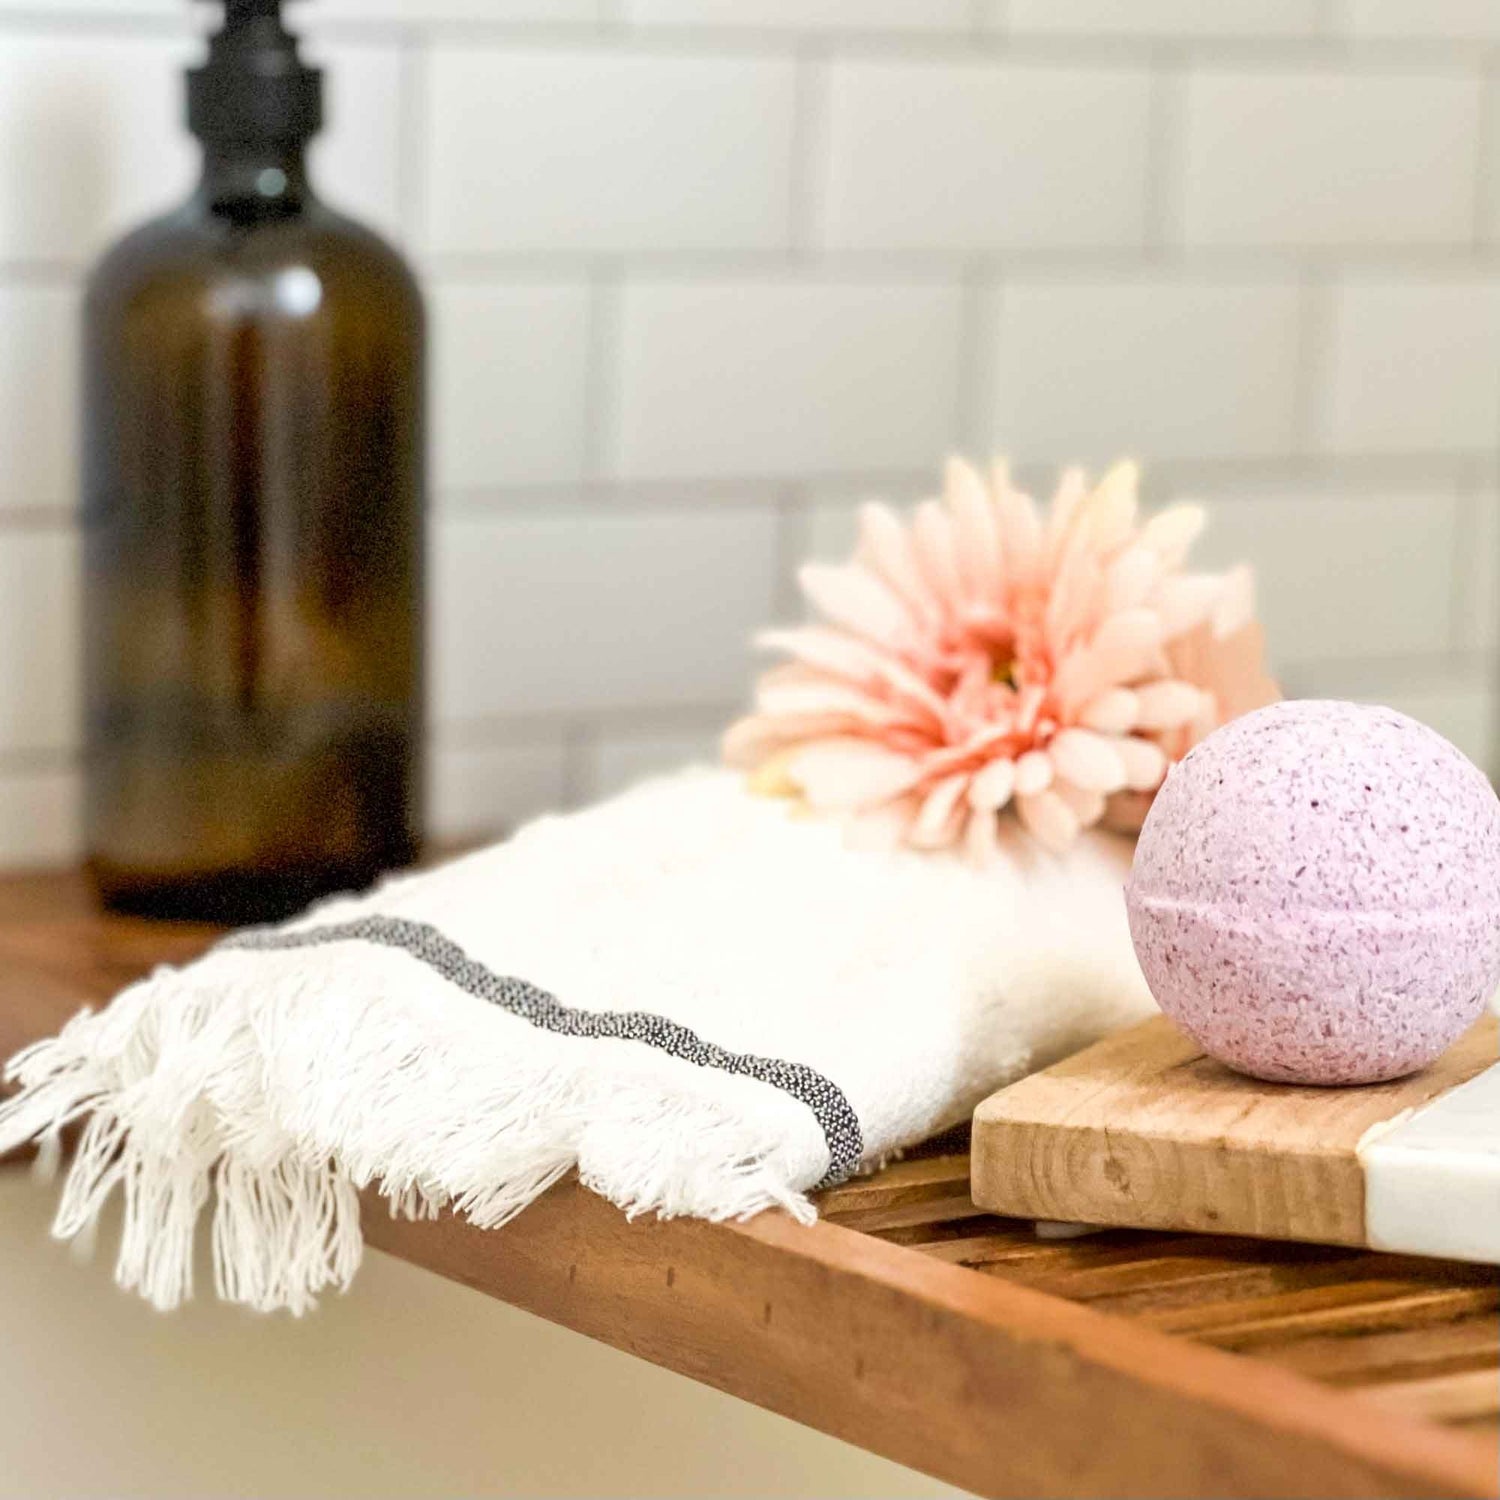 Indulge in Luxury with our Handcrafted Rose Petals Bath Bombs - Soothe Your Senses and Nourish Your Skin with a Spa-like Experience